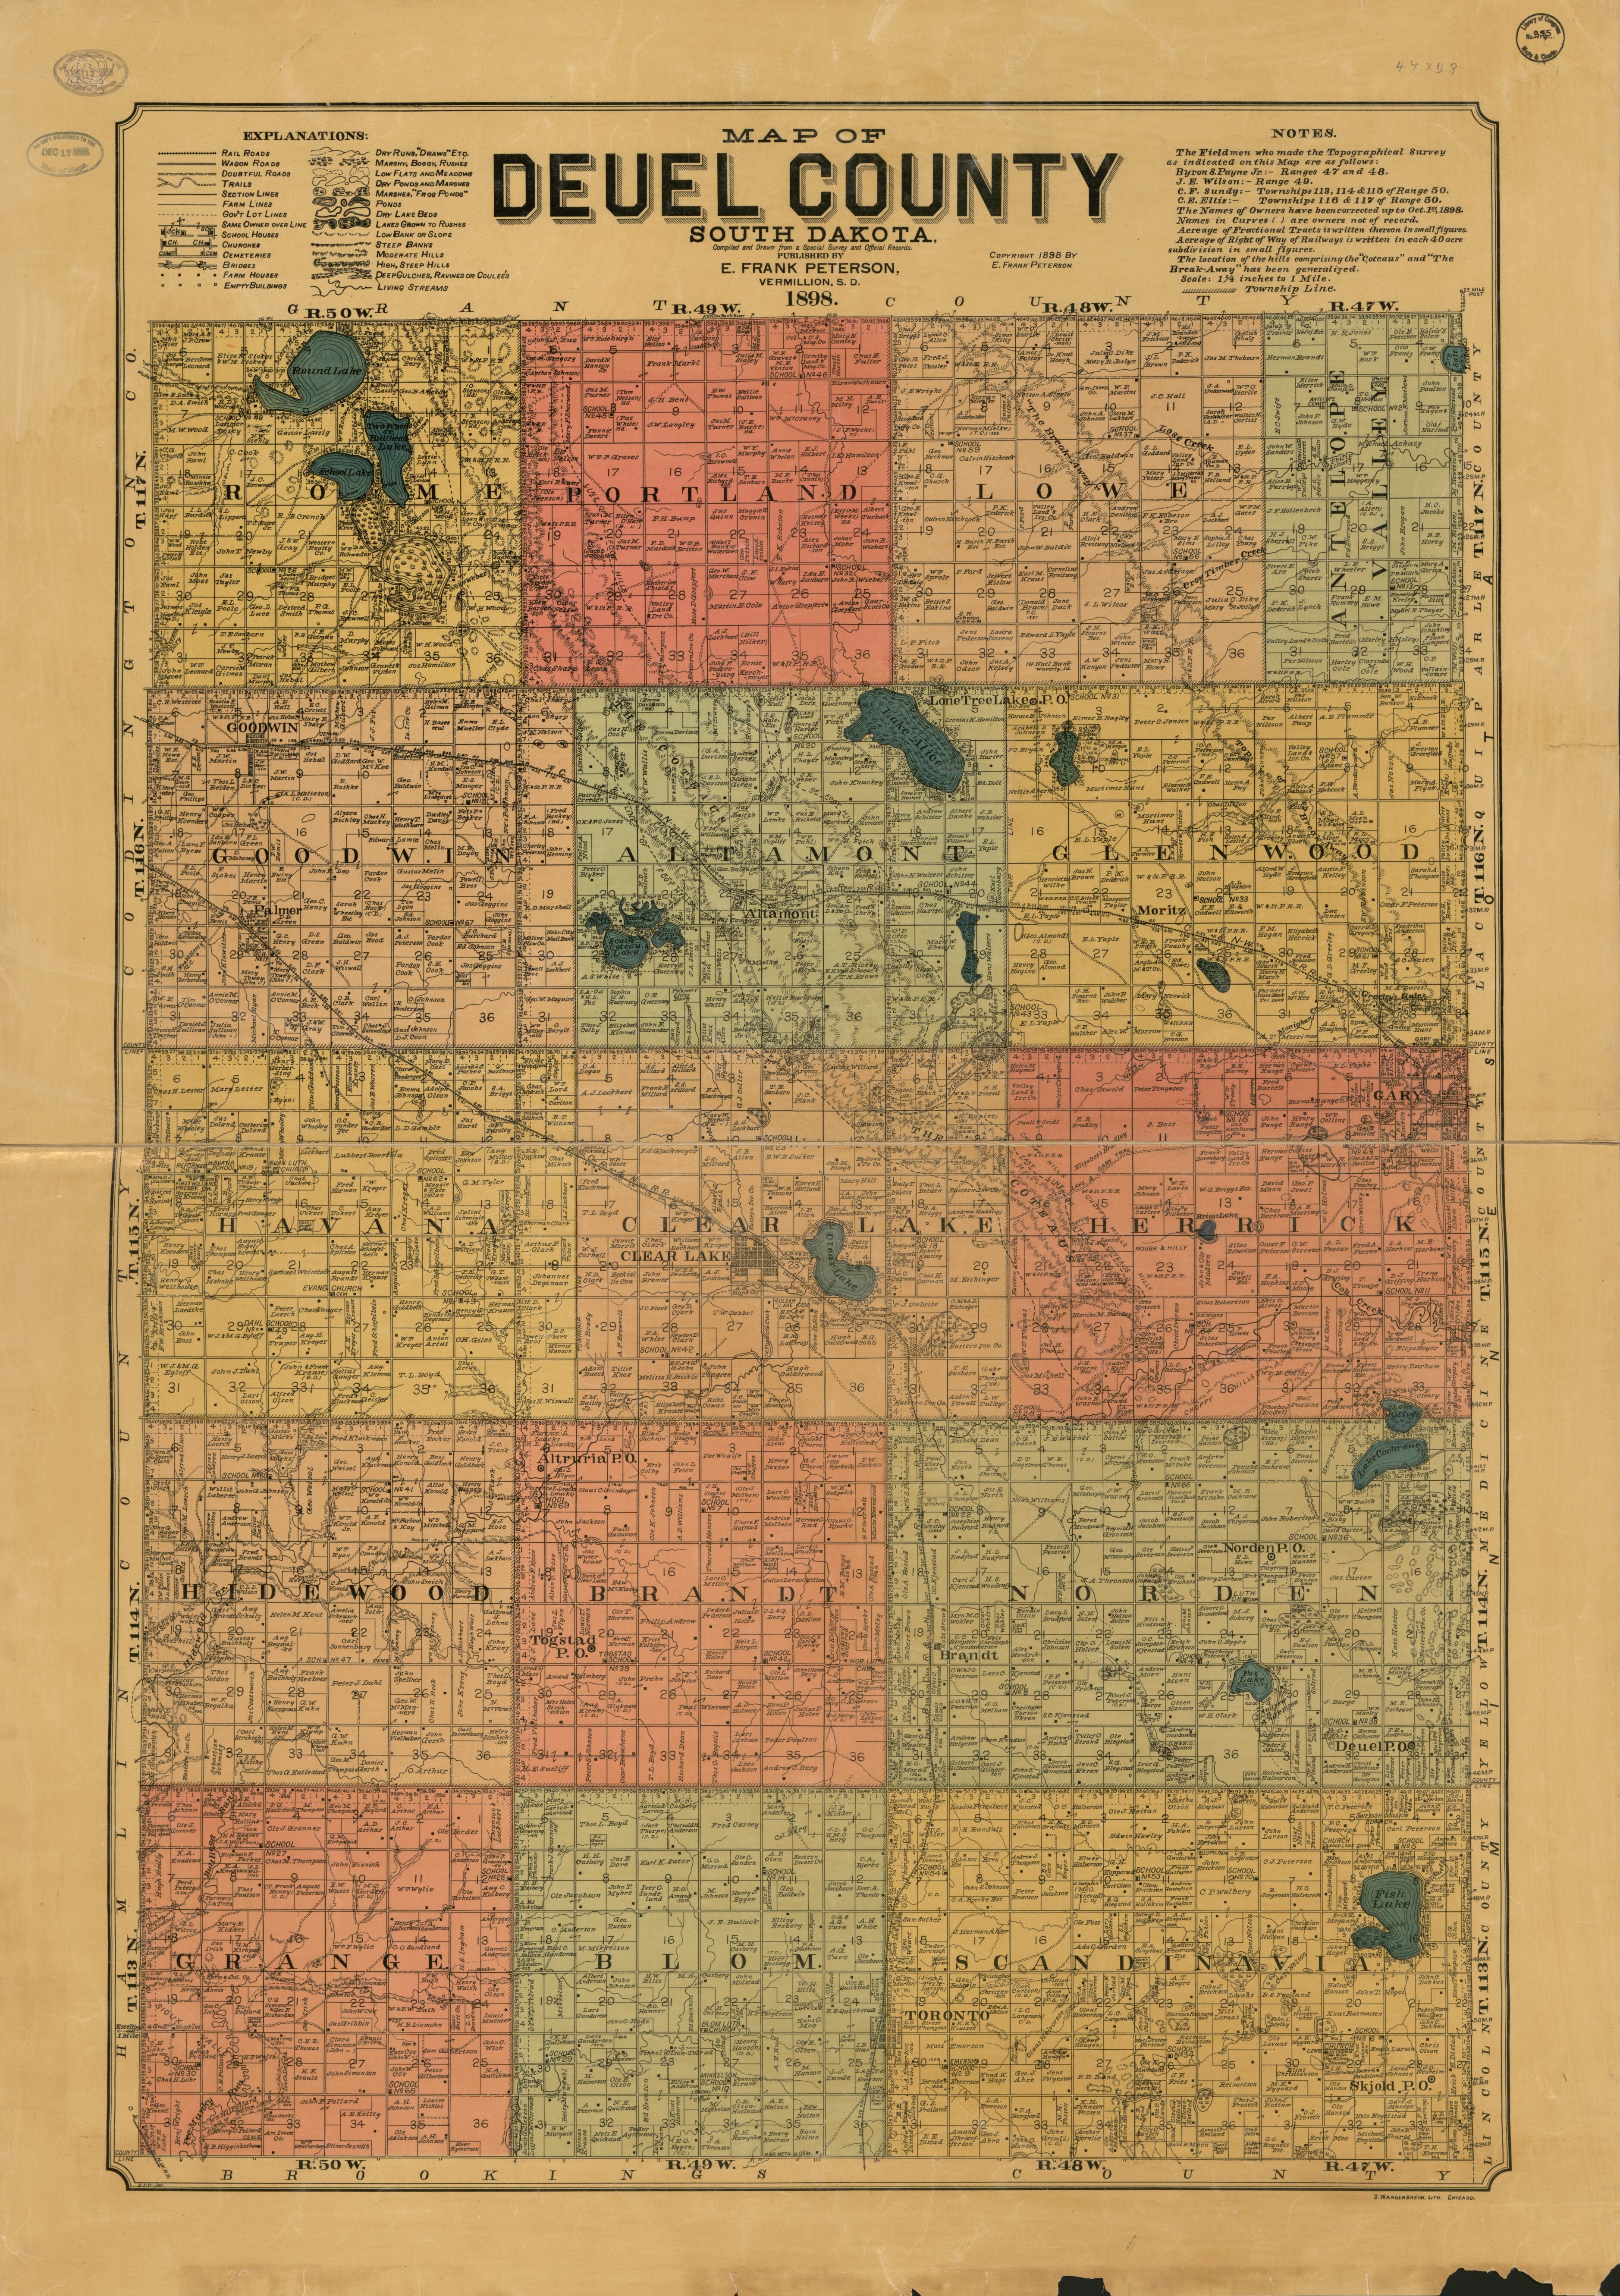 This old map of Map of Deuel County, South Dakota : Compiled and Drawn from a Special Survey and Official Records from 1899 was created by E. Frank Peterson, S. Wangersheim in 1899